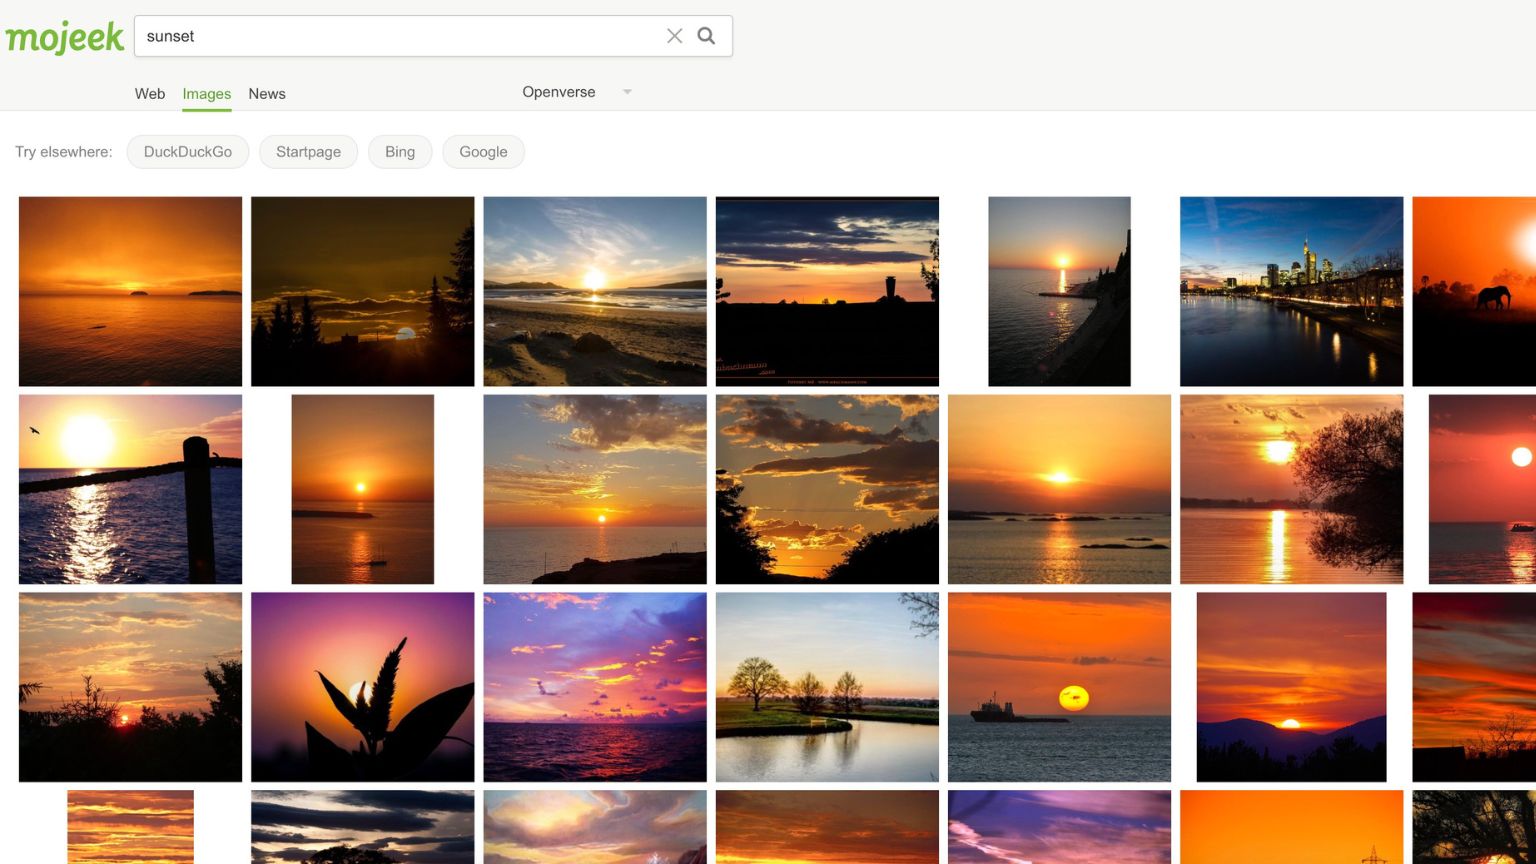 Private Search Engine Mojeek Adds Openverse, a Search Tool For Openly-Licensed Images